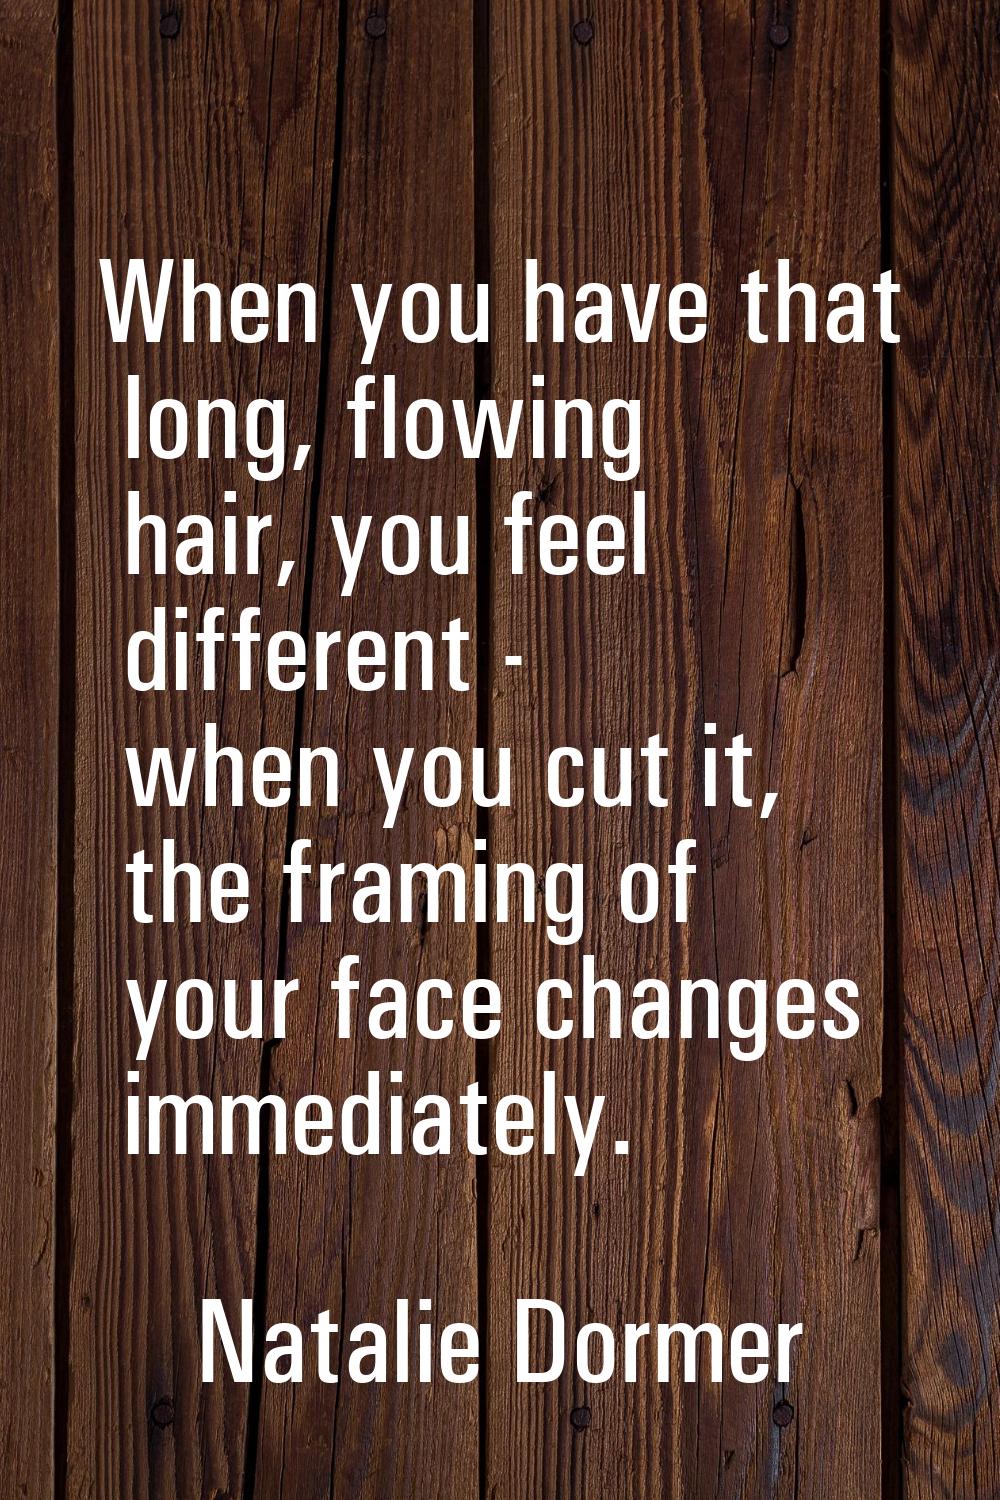 When you have that long, flowing hair, you feel different - when you cut it, the framing of your fa